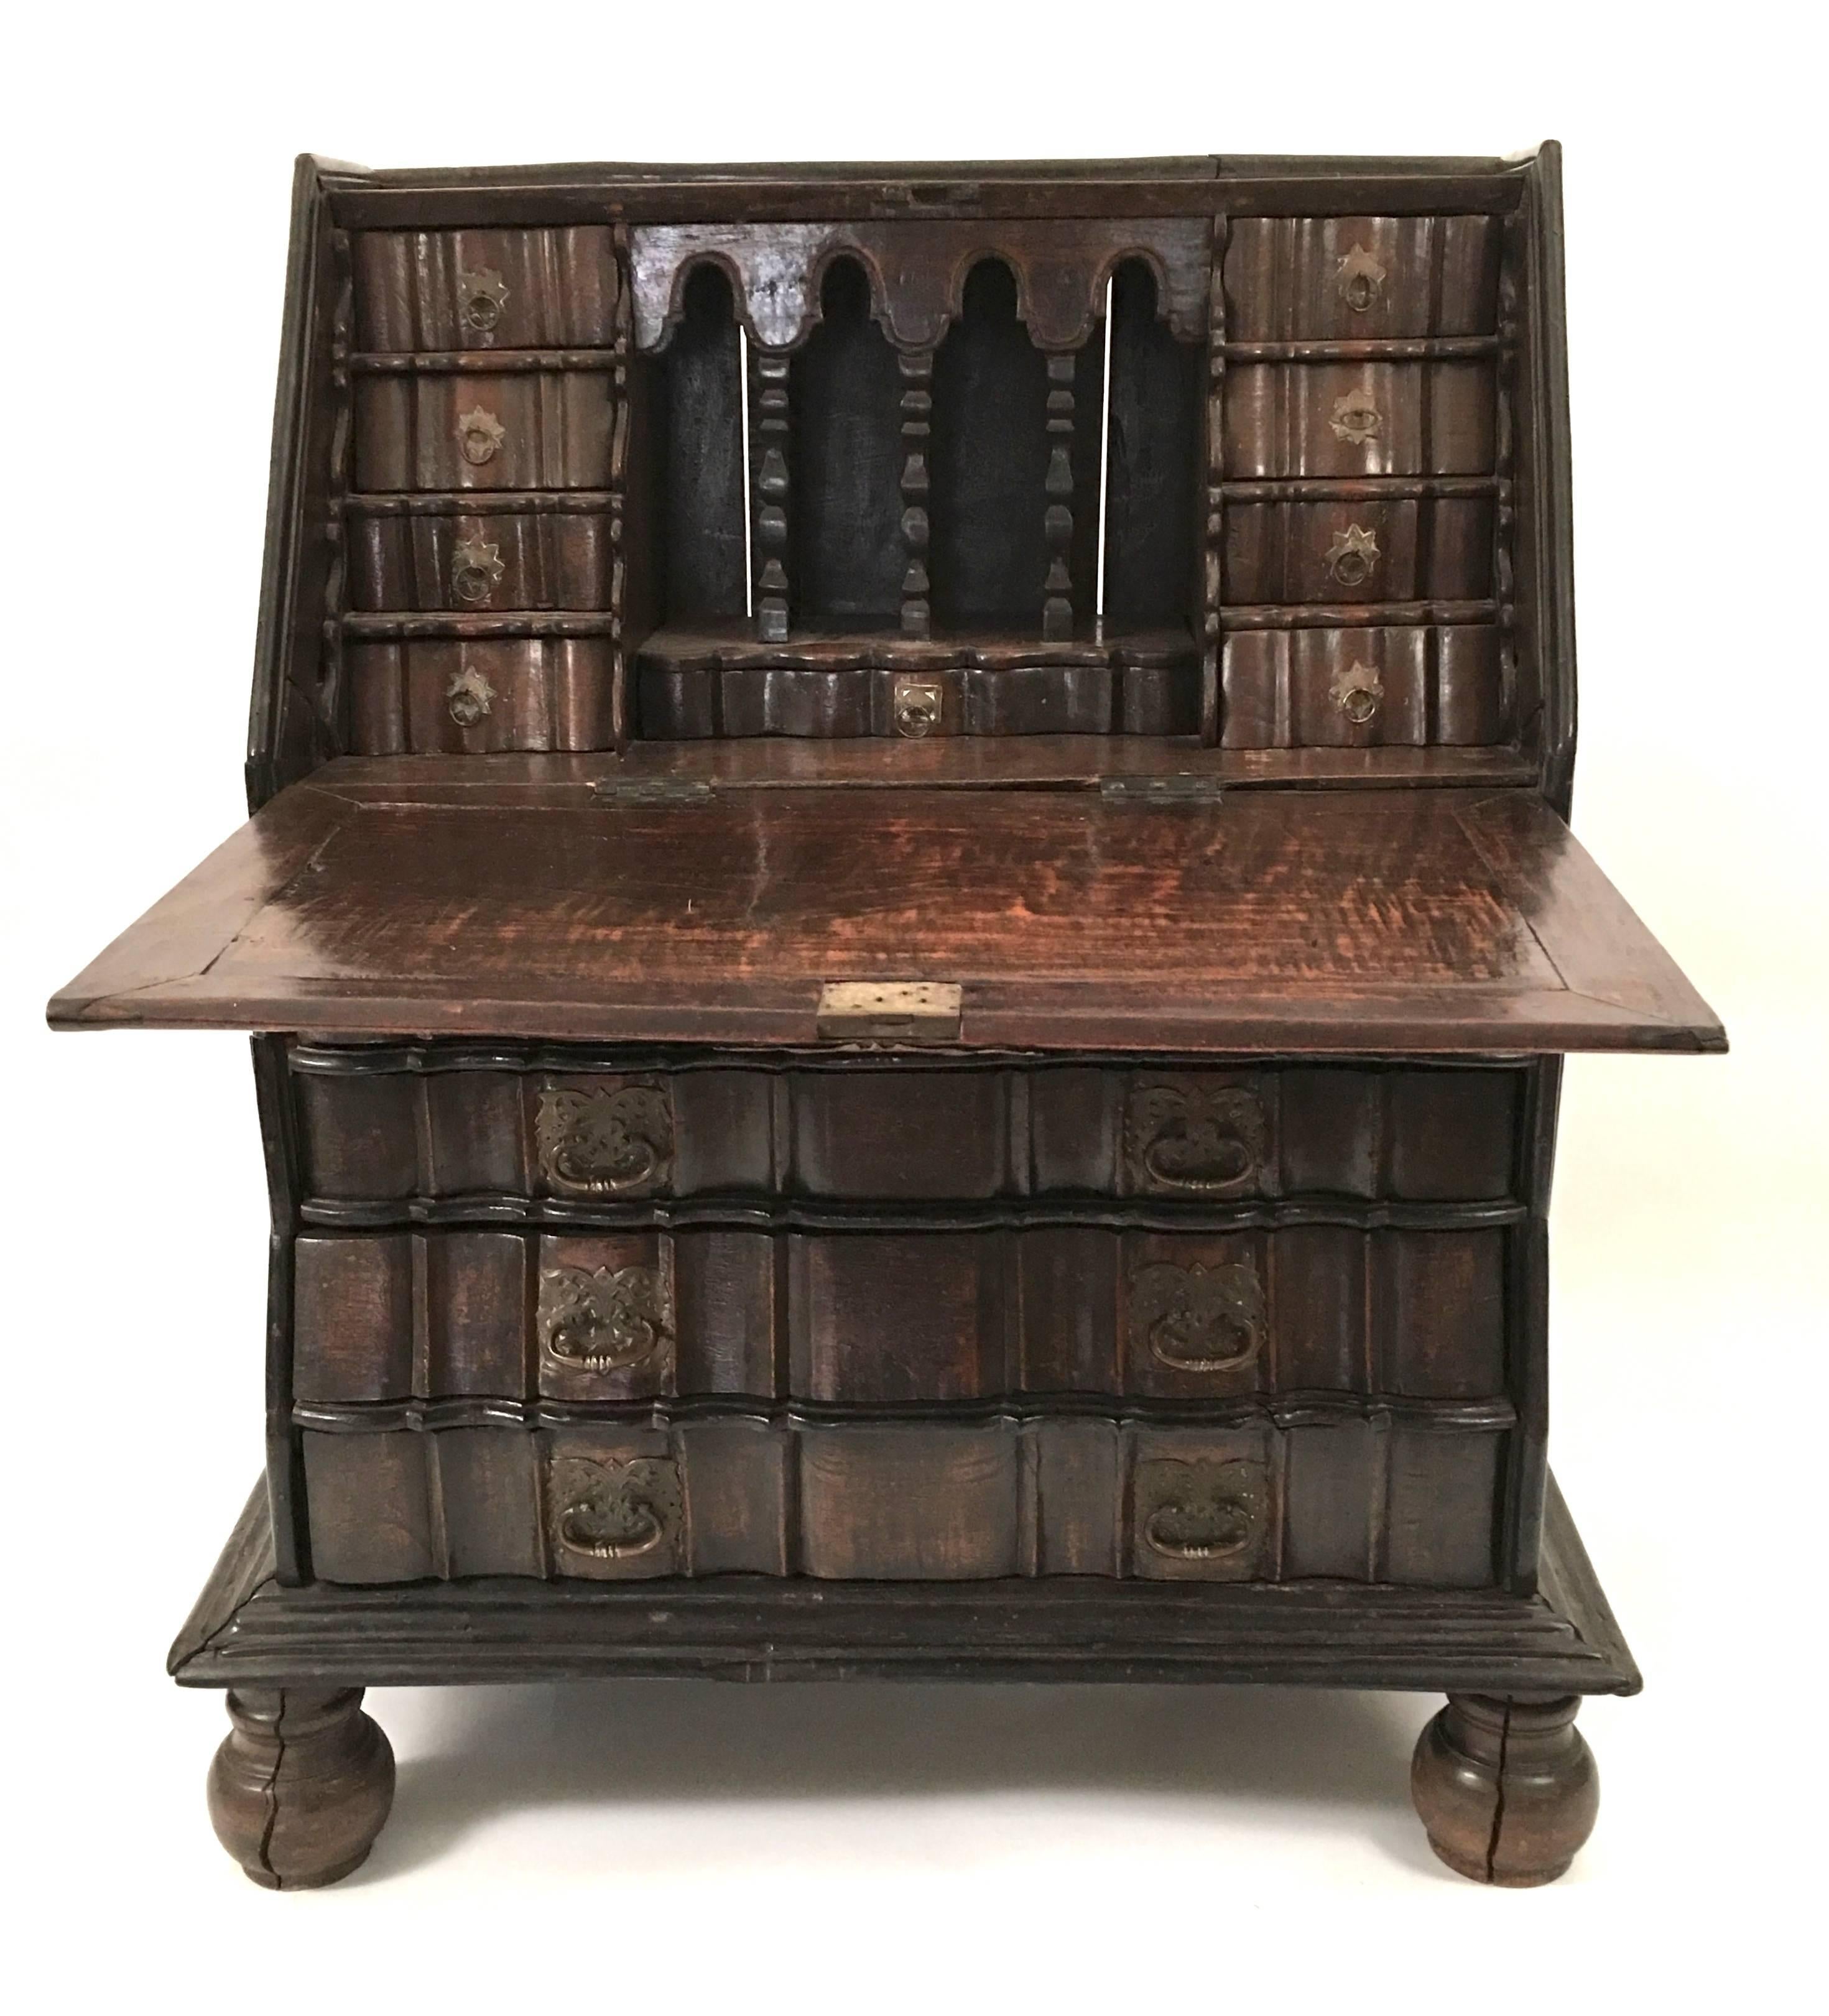 An unusual and sculptural block fronted Dutch Colonial slant lid desk in padouk wood with pierced metal drawer pulls and bird-decorated escutcheon, the exterior of the case with channeled carved top and sides, the fall front writing surface